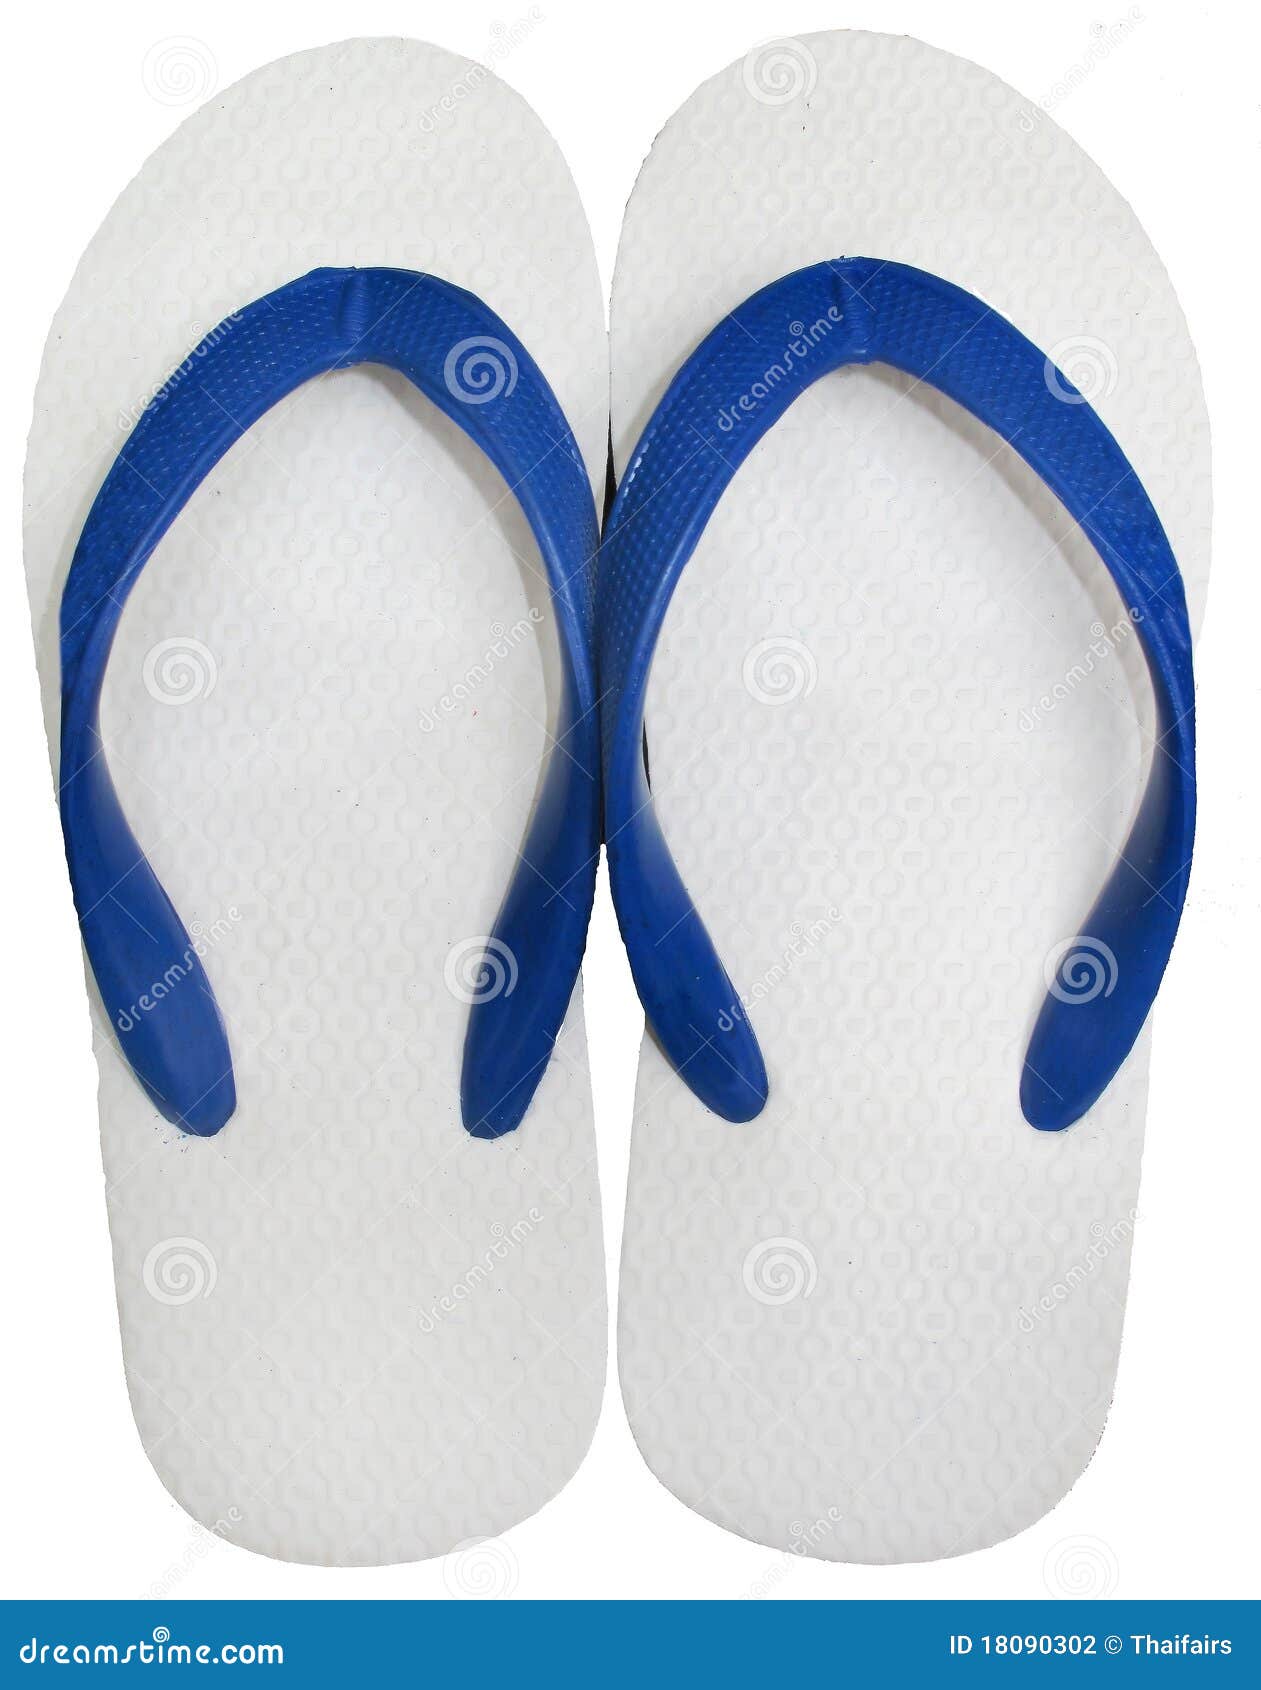 One Pairs Flip Flops White Color Isolated on White Stock Photo - Image ...